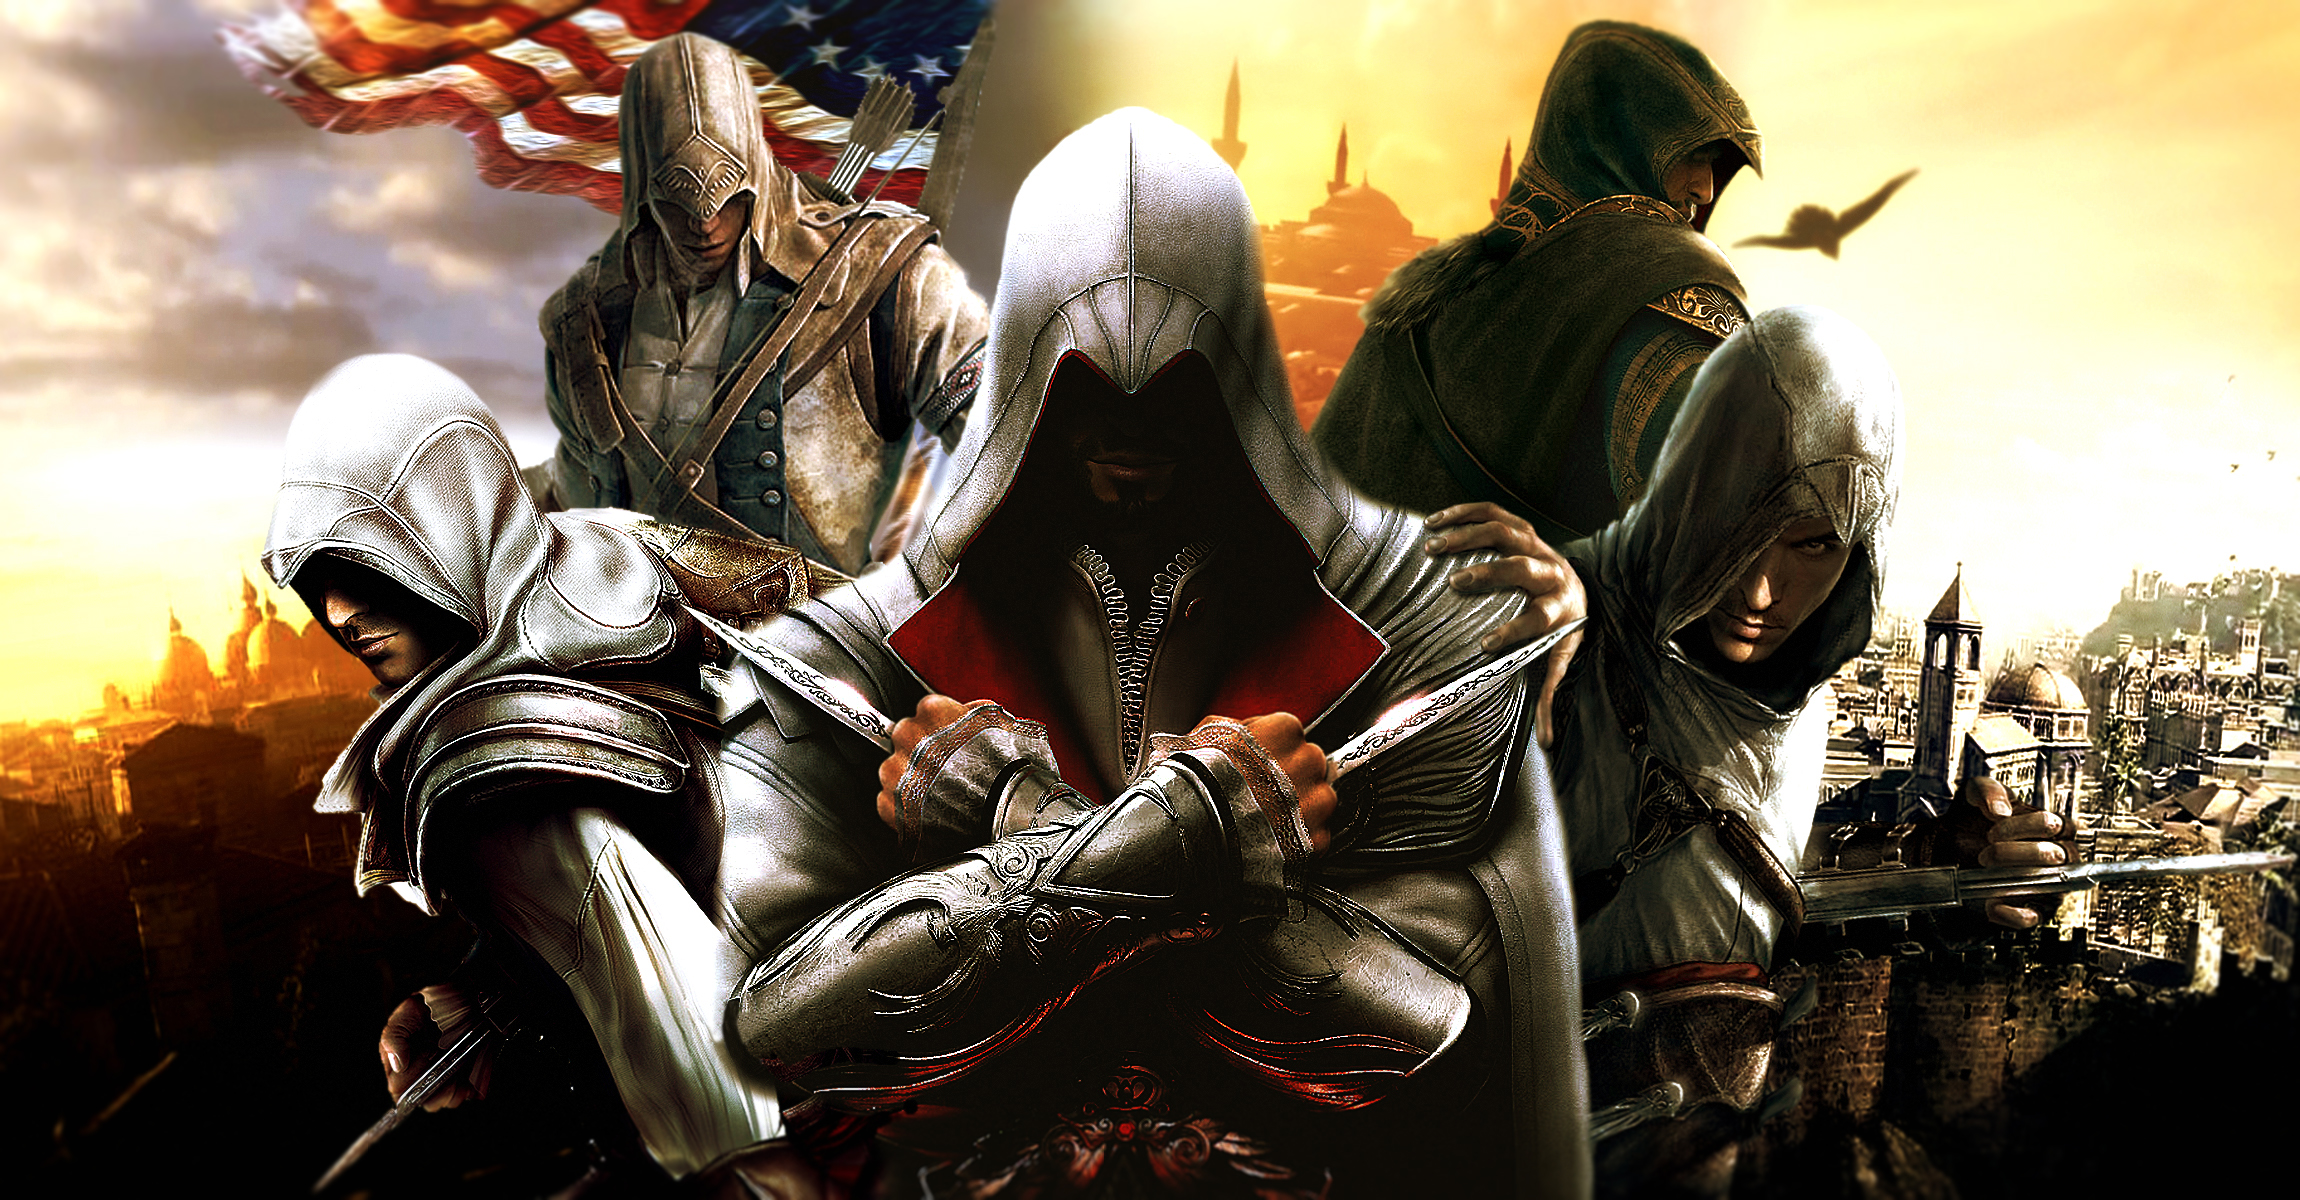 altair (assassin's creed), video game, assassin's creed, conor, ezio (assassin's creed)